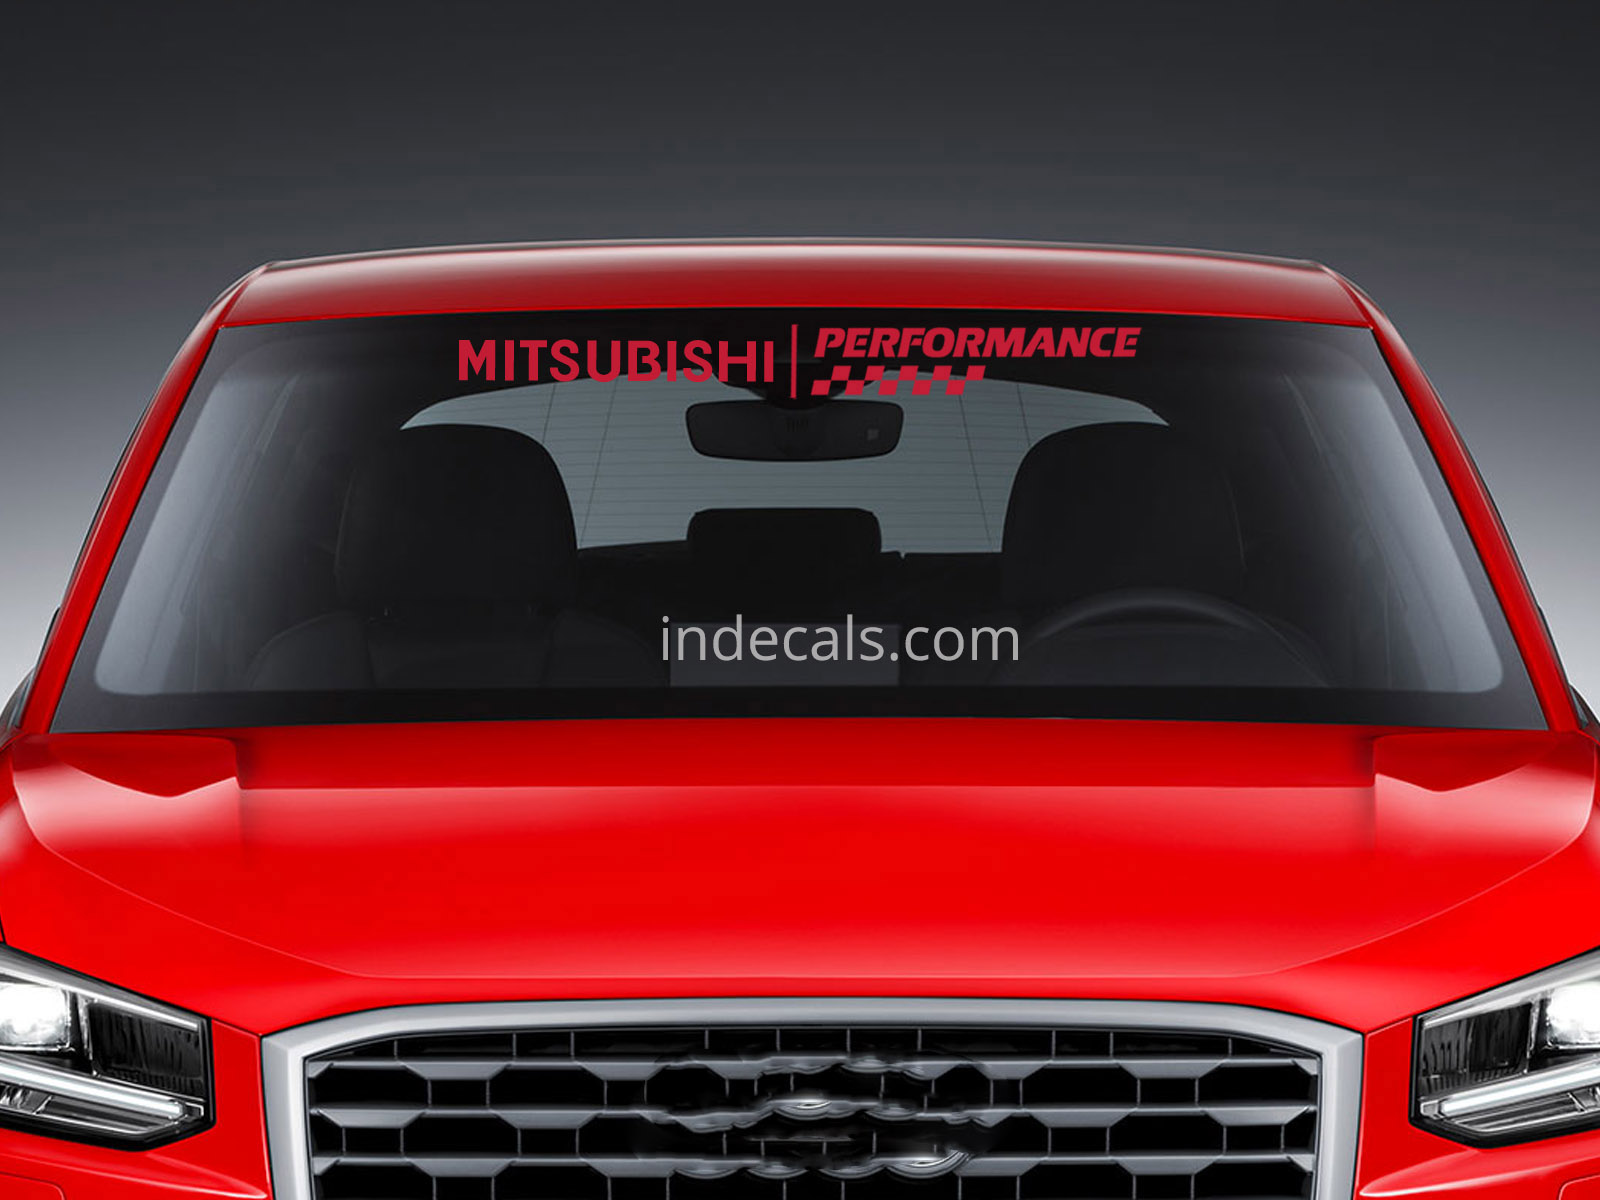 1 x Mitsubishi Performance Sticker for Windshield or Back Window - Red